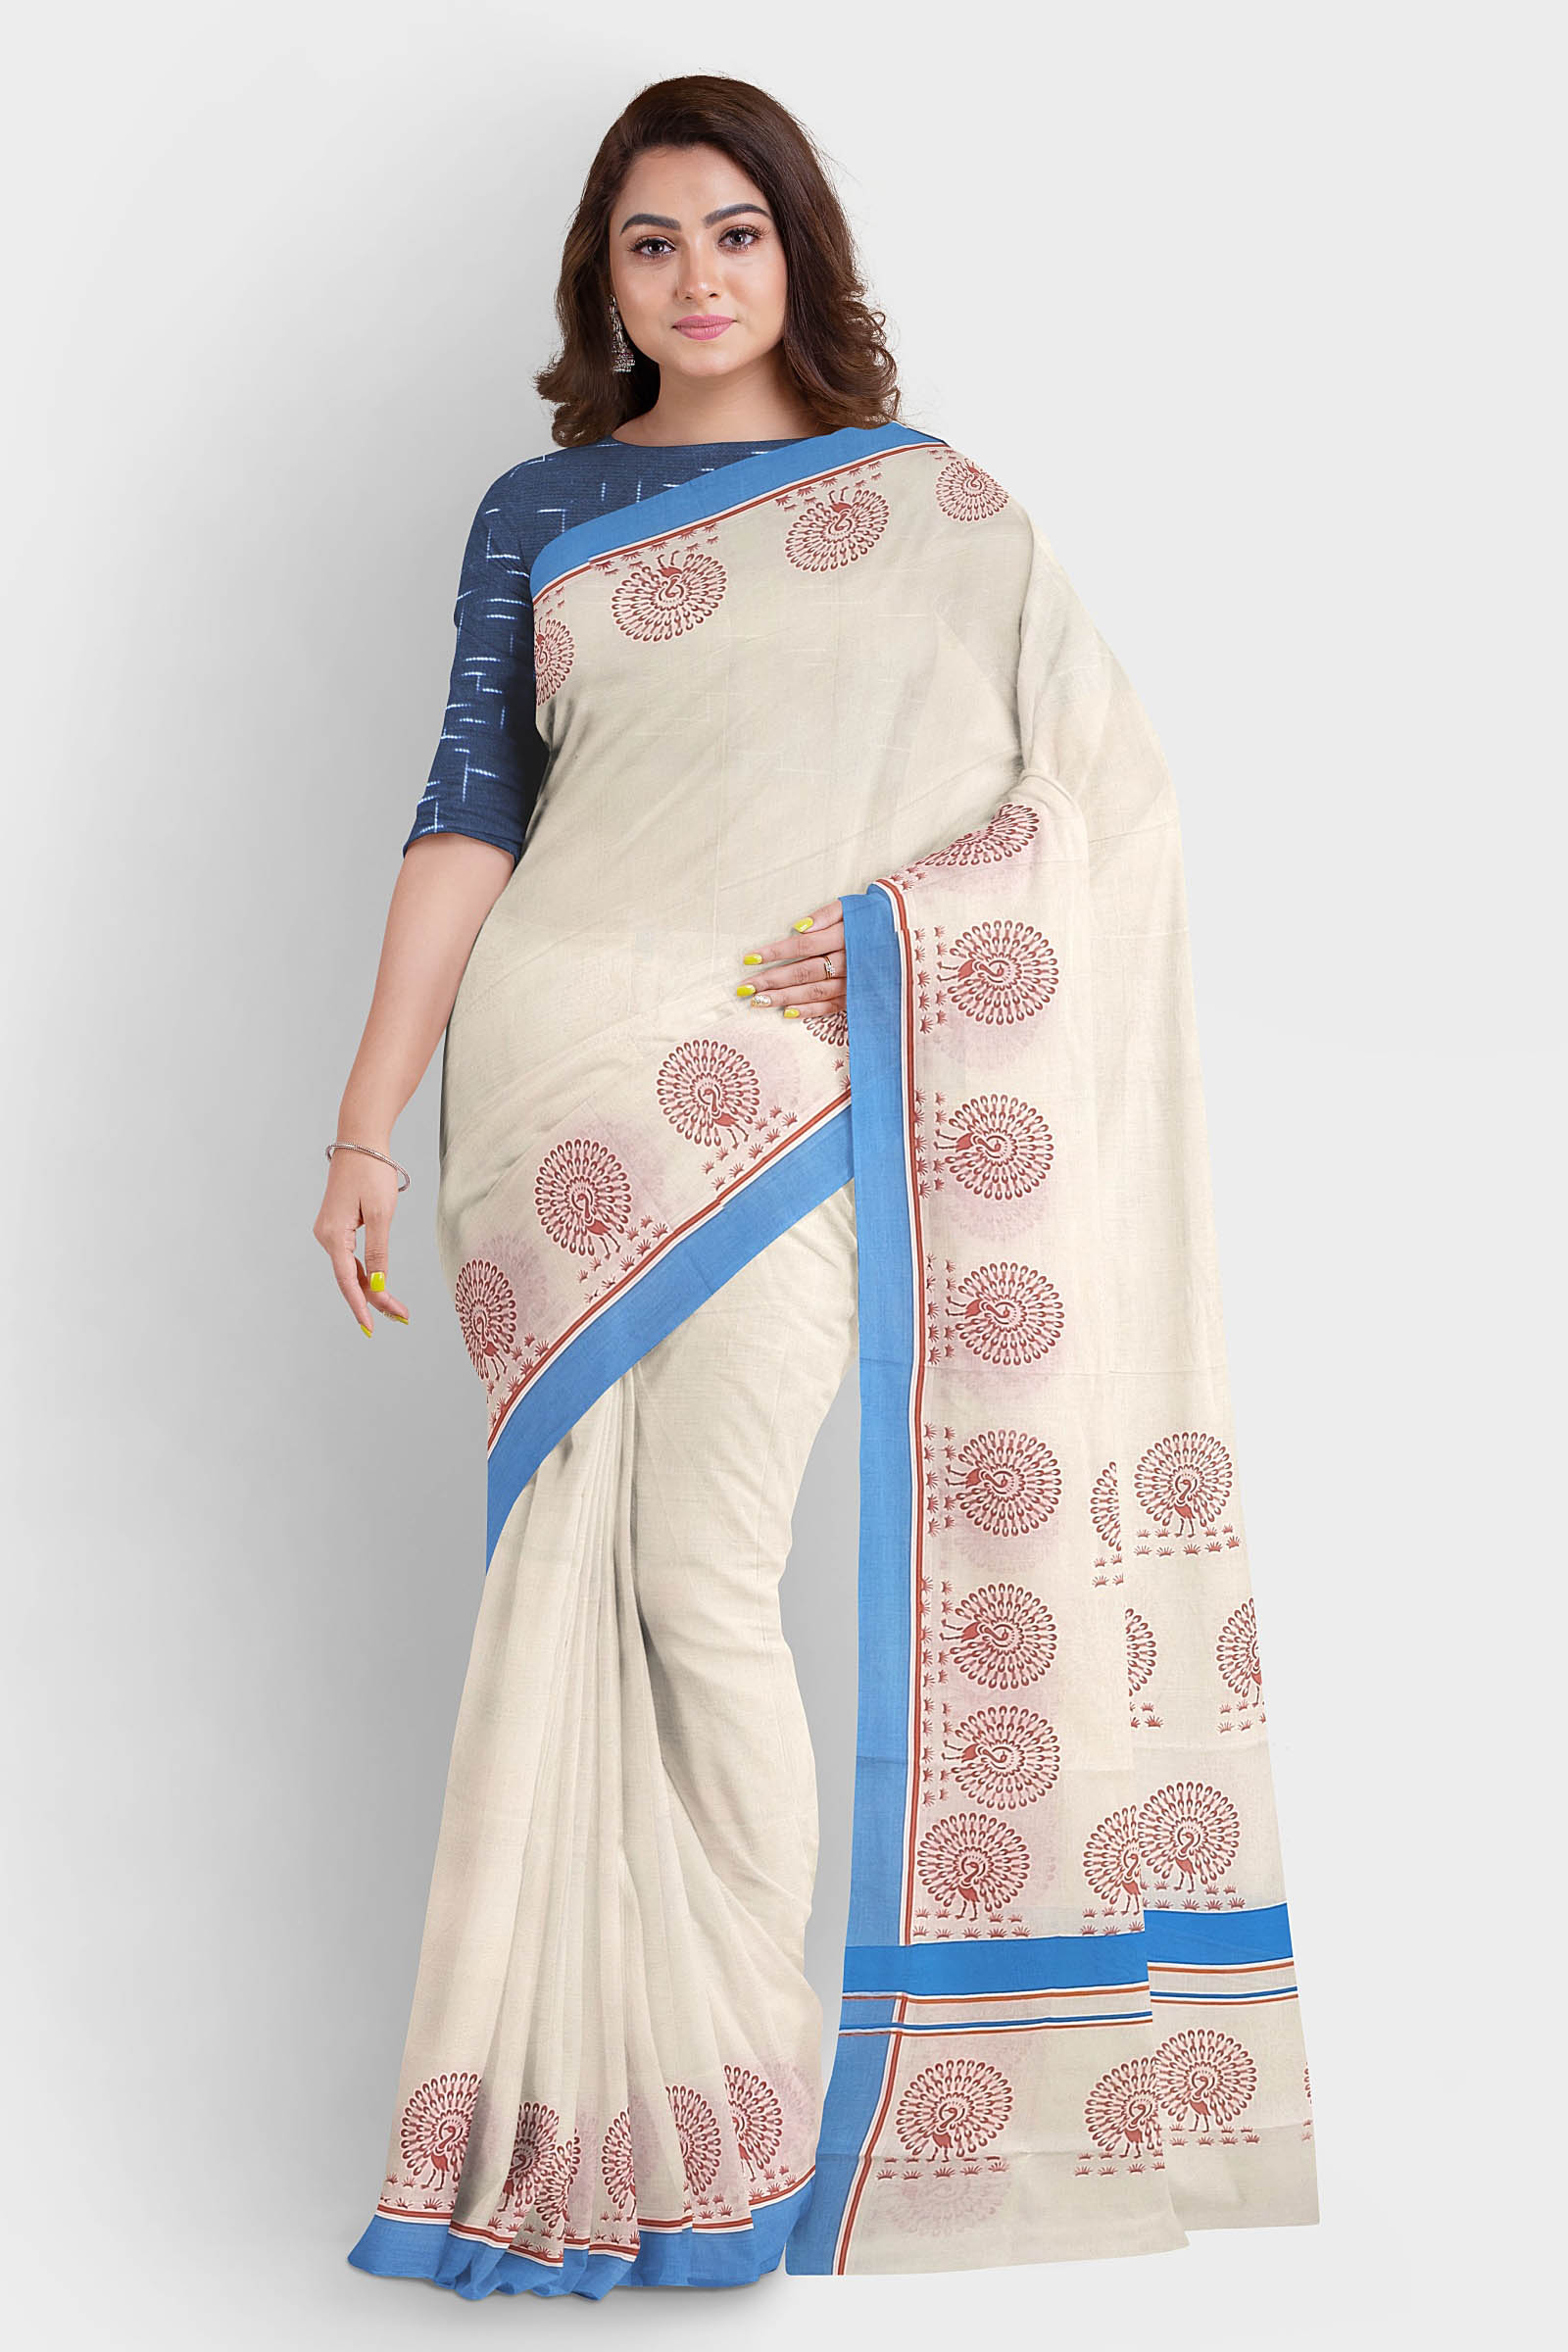 White with Silver and Royal Blue Border plain Linen Saree - Loomfolks